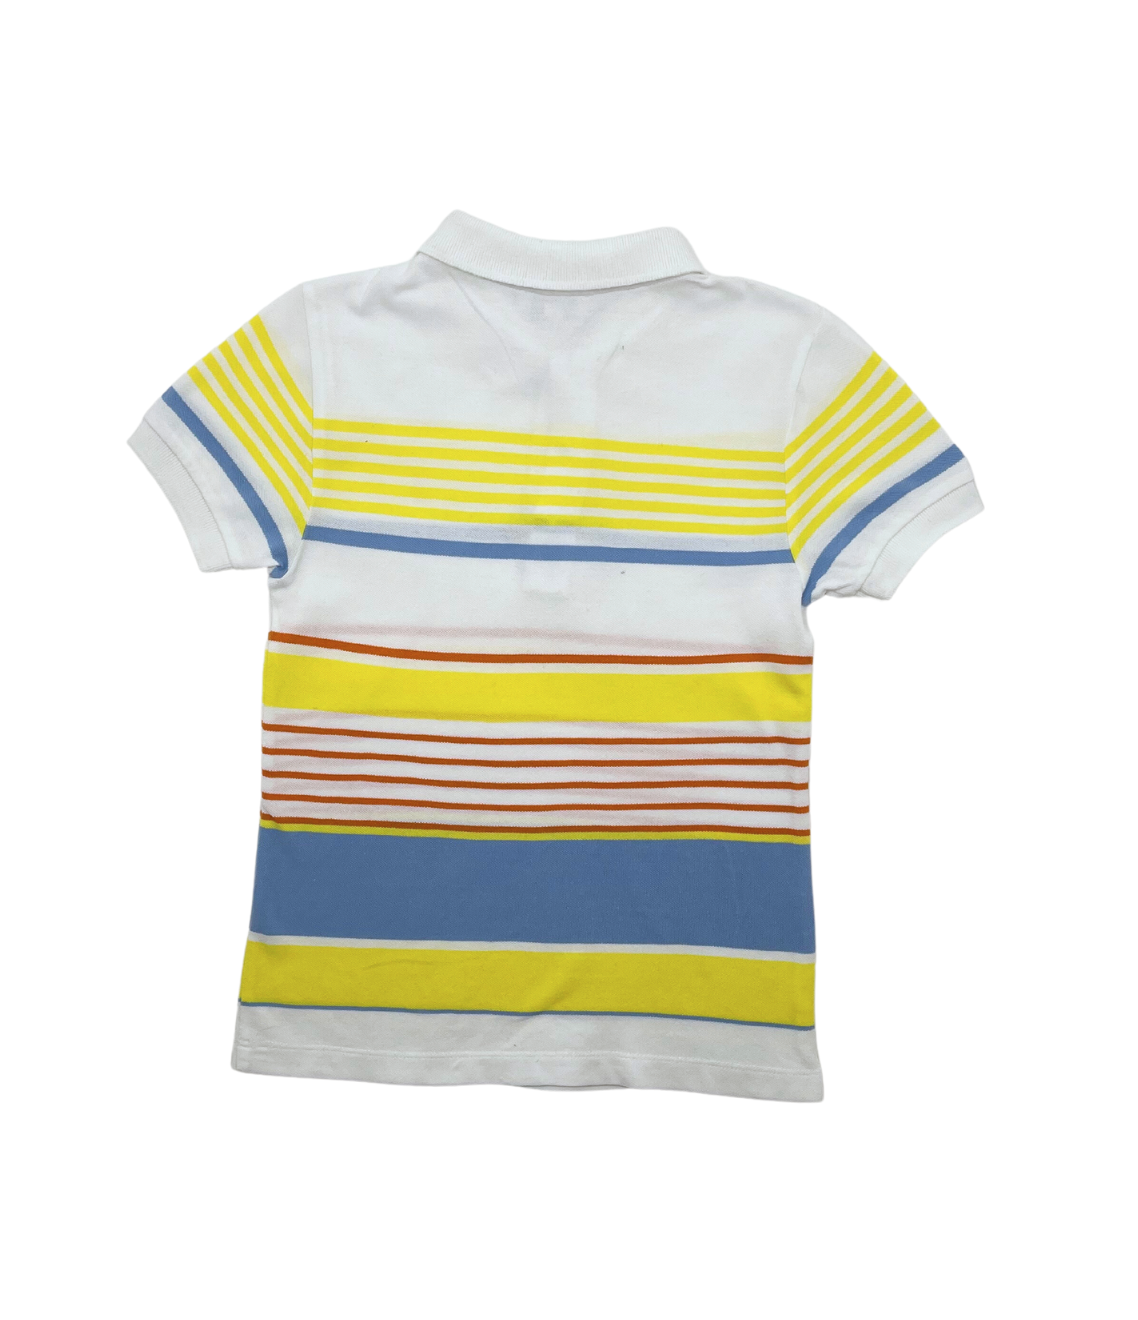 JACADI - Polo shirt with multicolored stripes - 6 years old